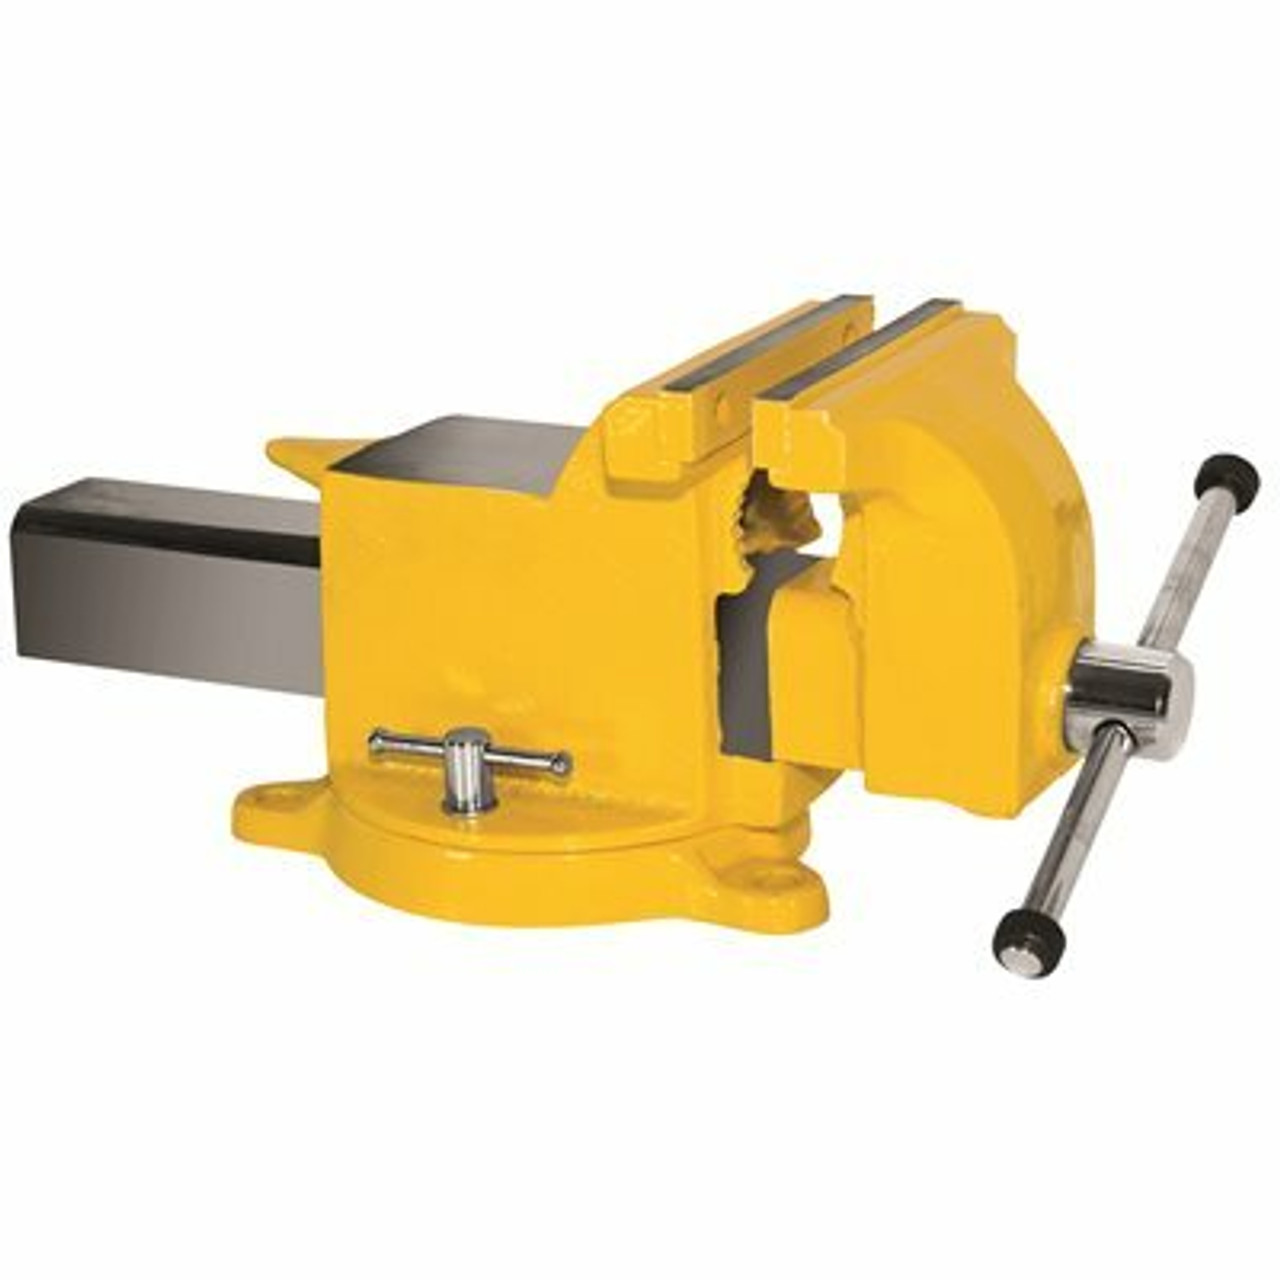 Yost 10 In. High Visibility All Steel Utility Workshop Bench Vise